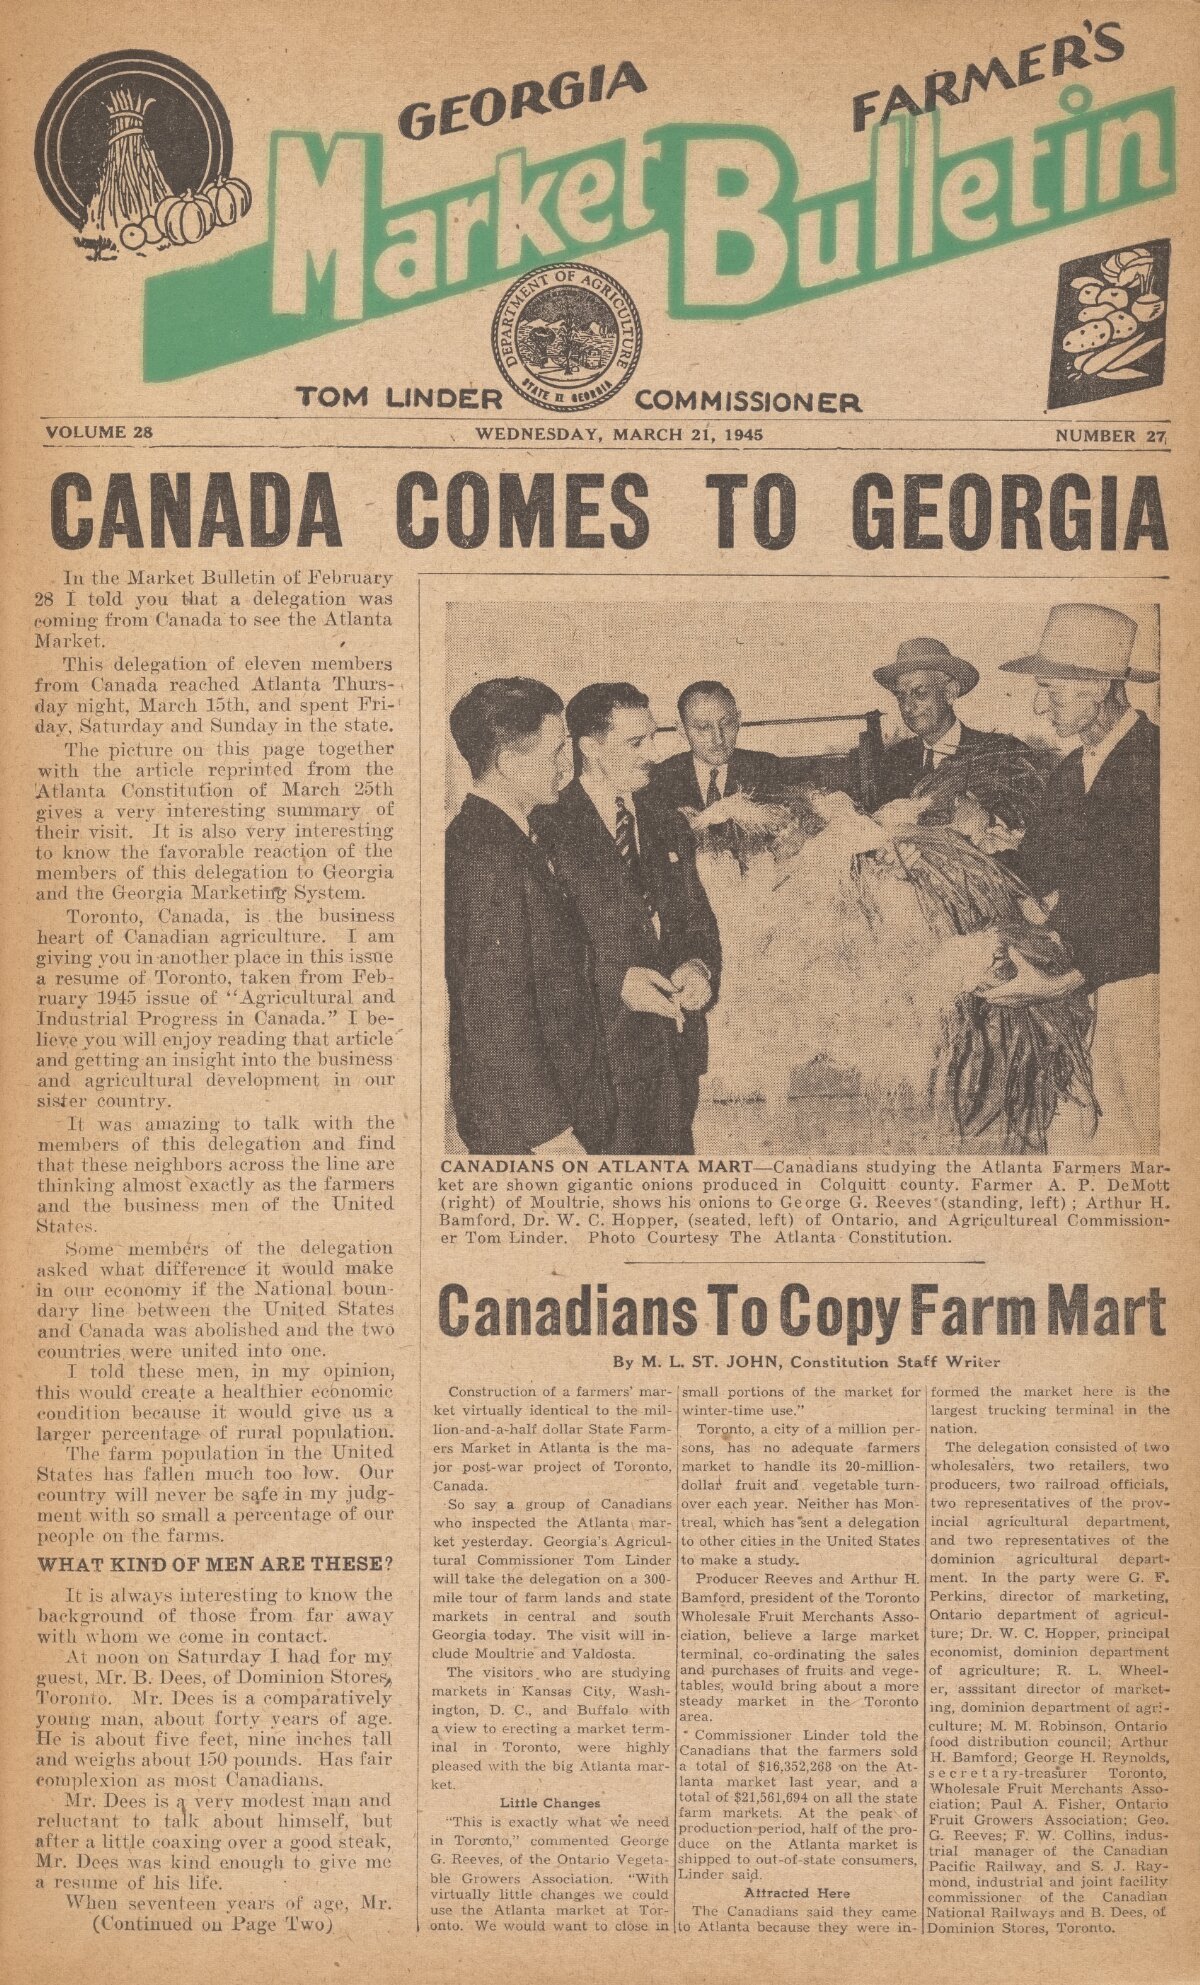 Farmers and consumers market bulletin, 1945 March 21 photo